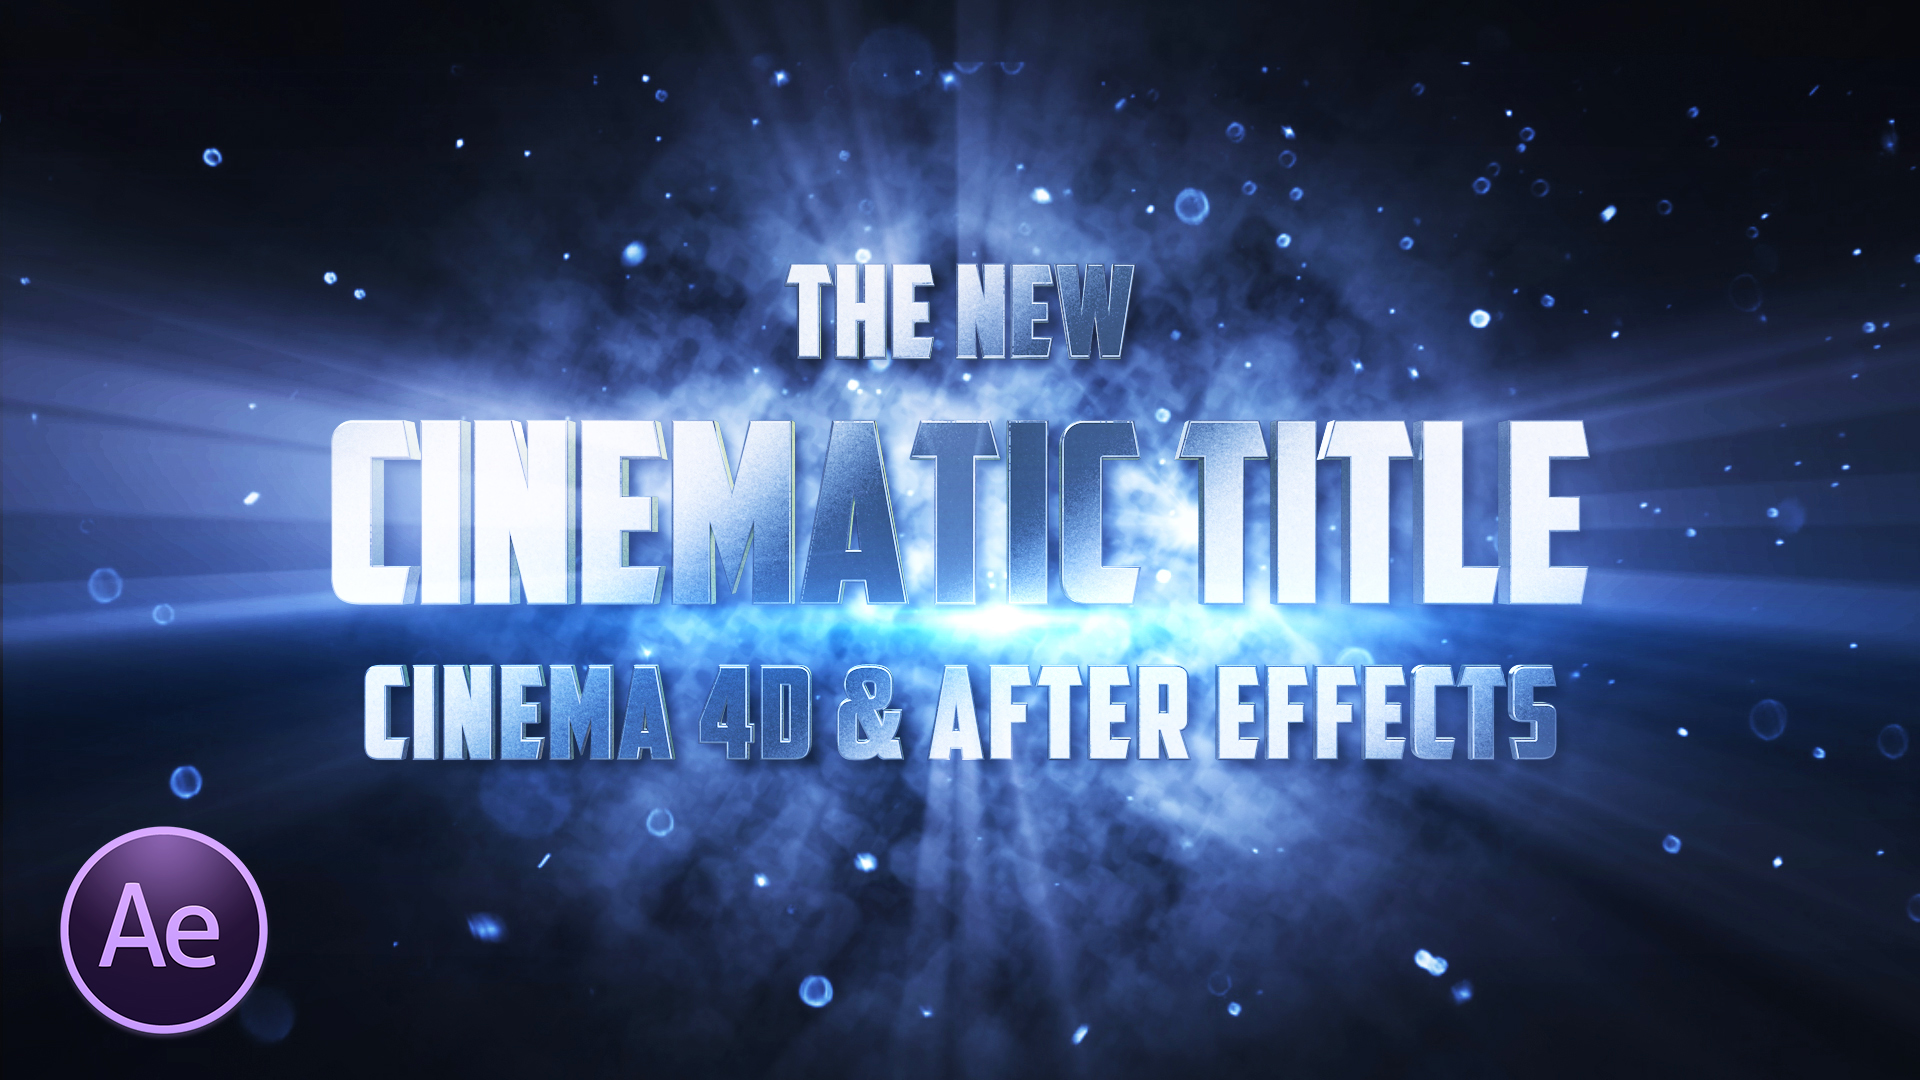 After Effects Templates free download Cinematic Title Animation in